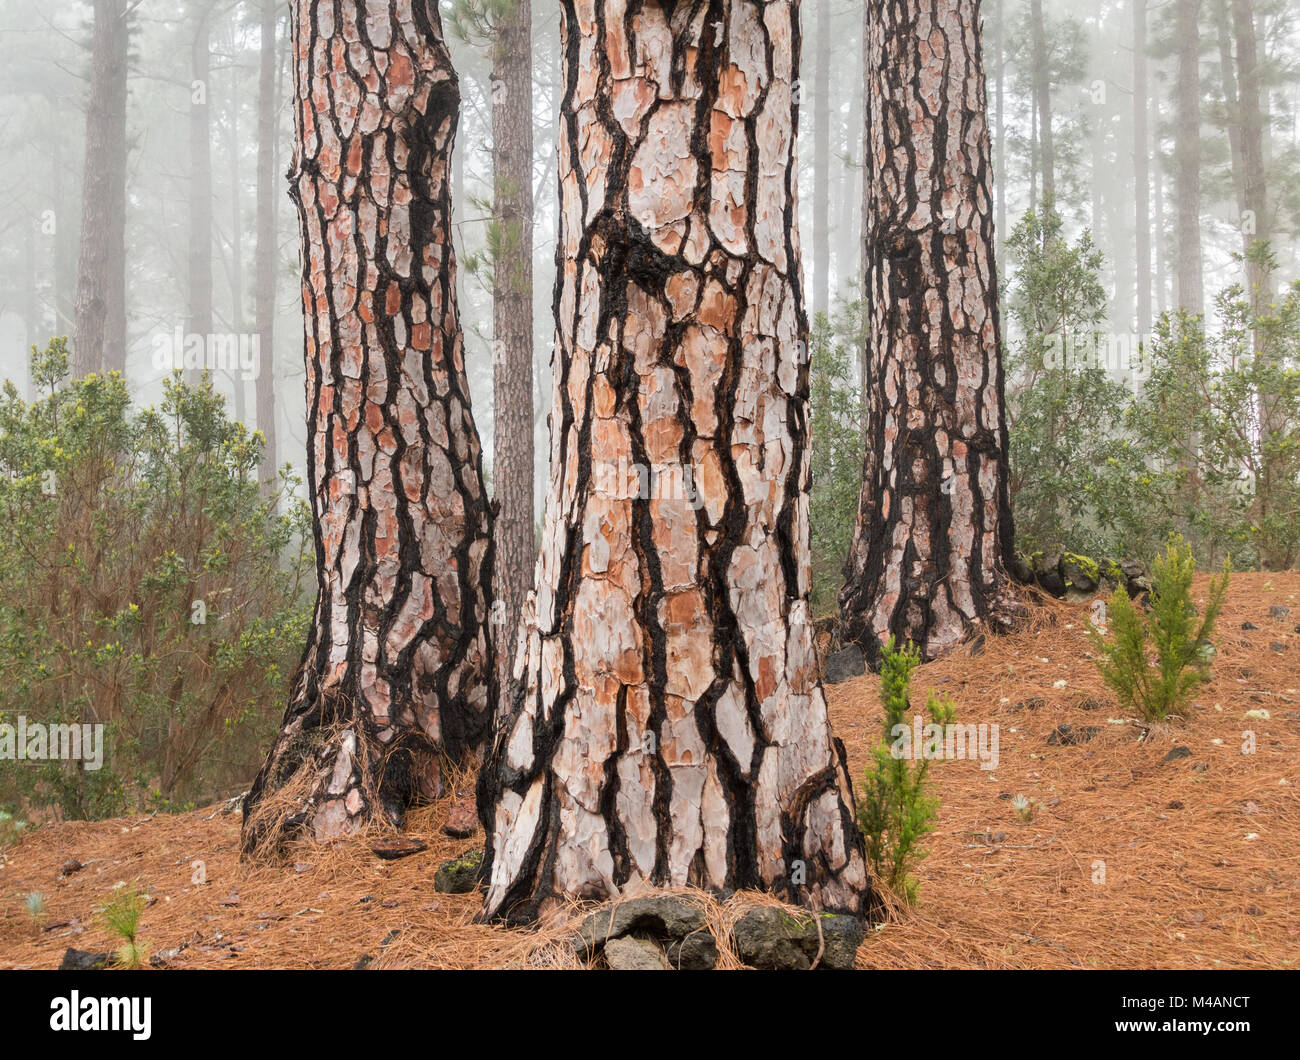 Canary pine trees (Pinus Canariensis) in misty mountain pine forest on Tenerife, Canary Islands, Spain Stock Photo